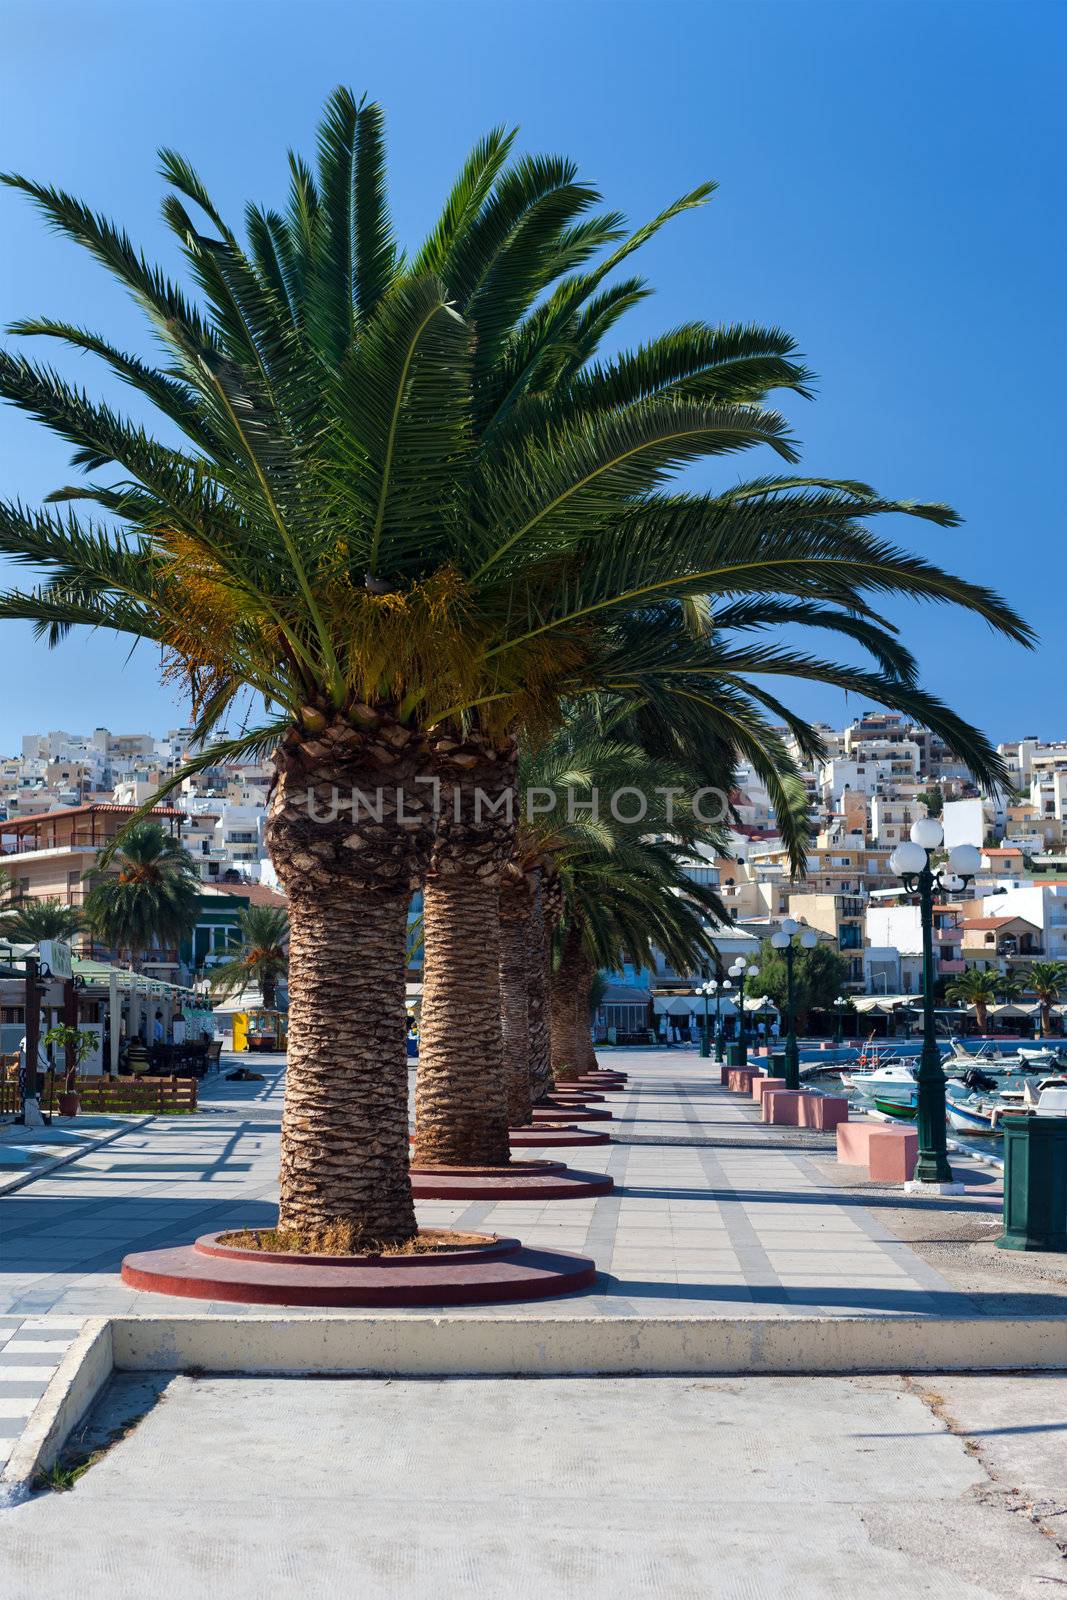 Promenade with palm trees in the town of Sitia on the island of Crete